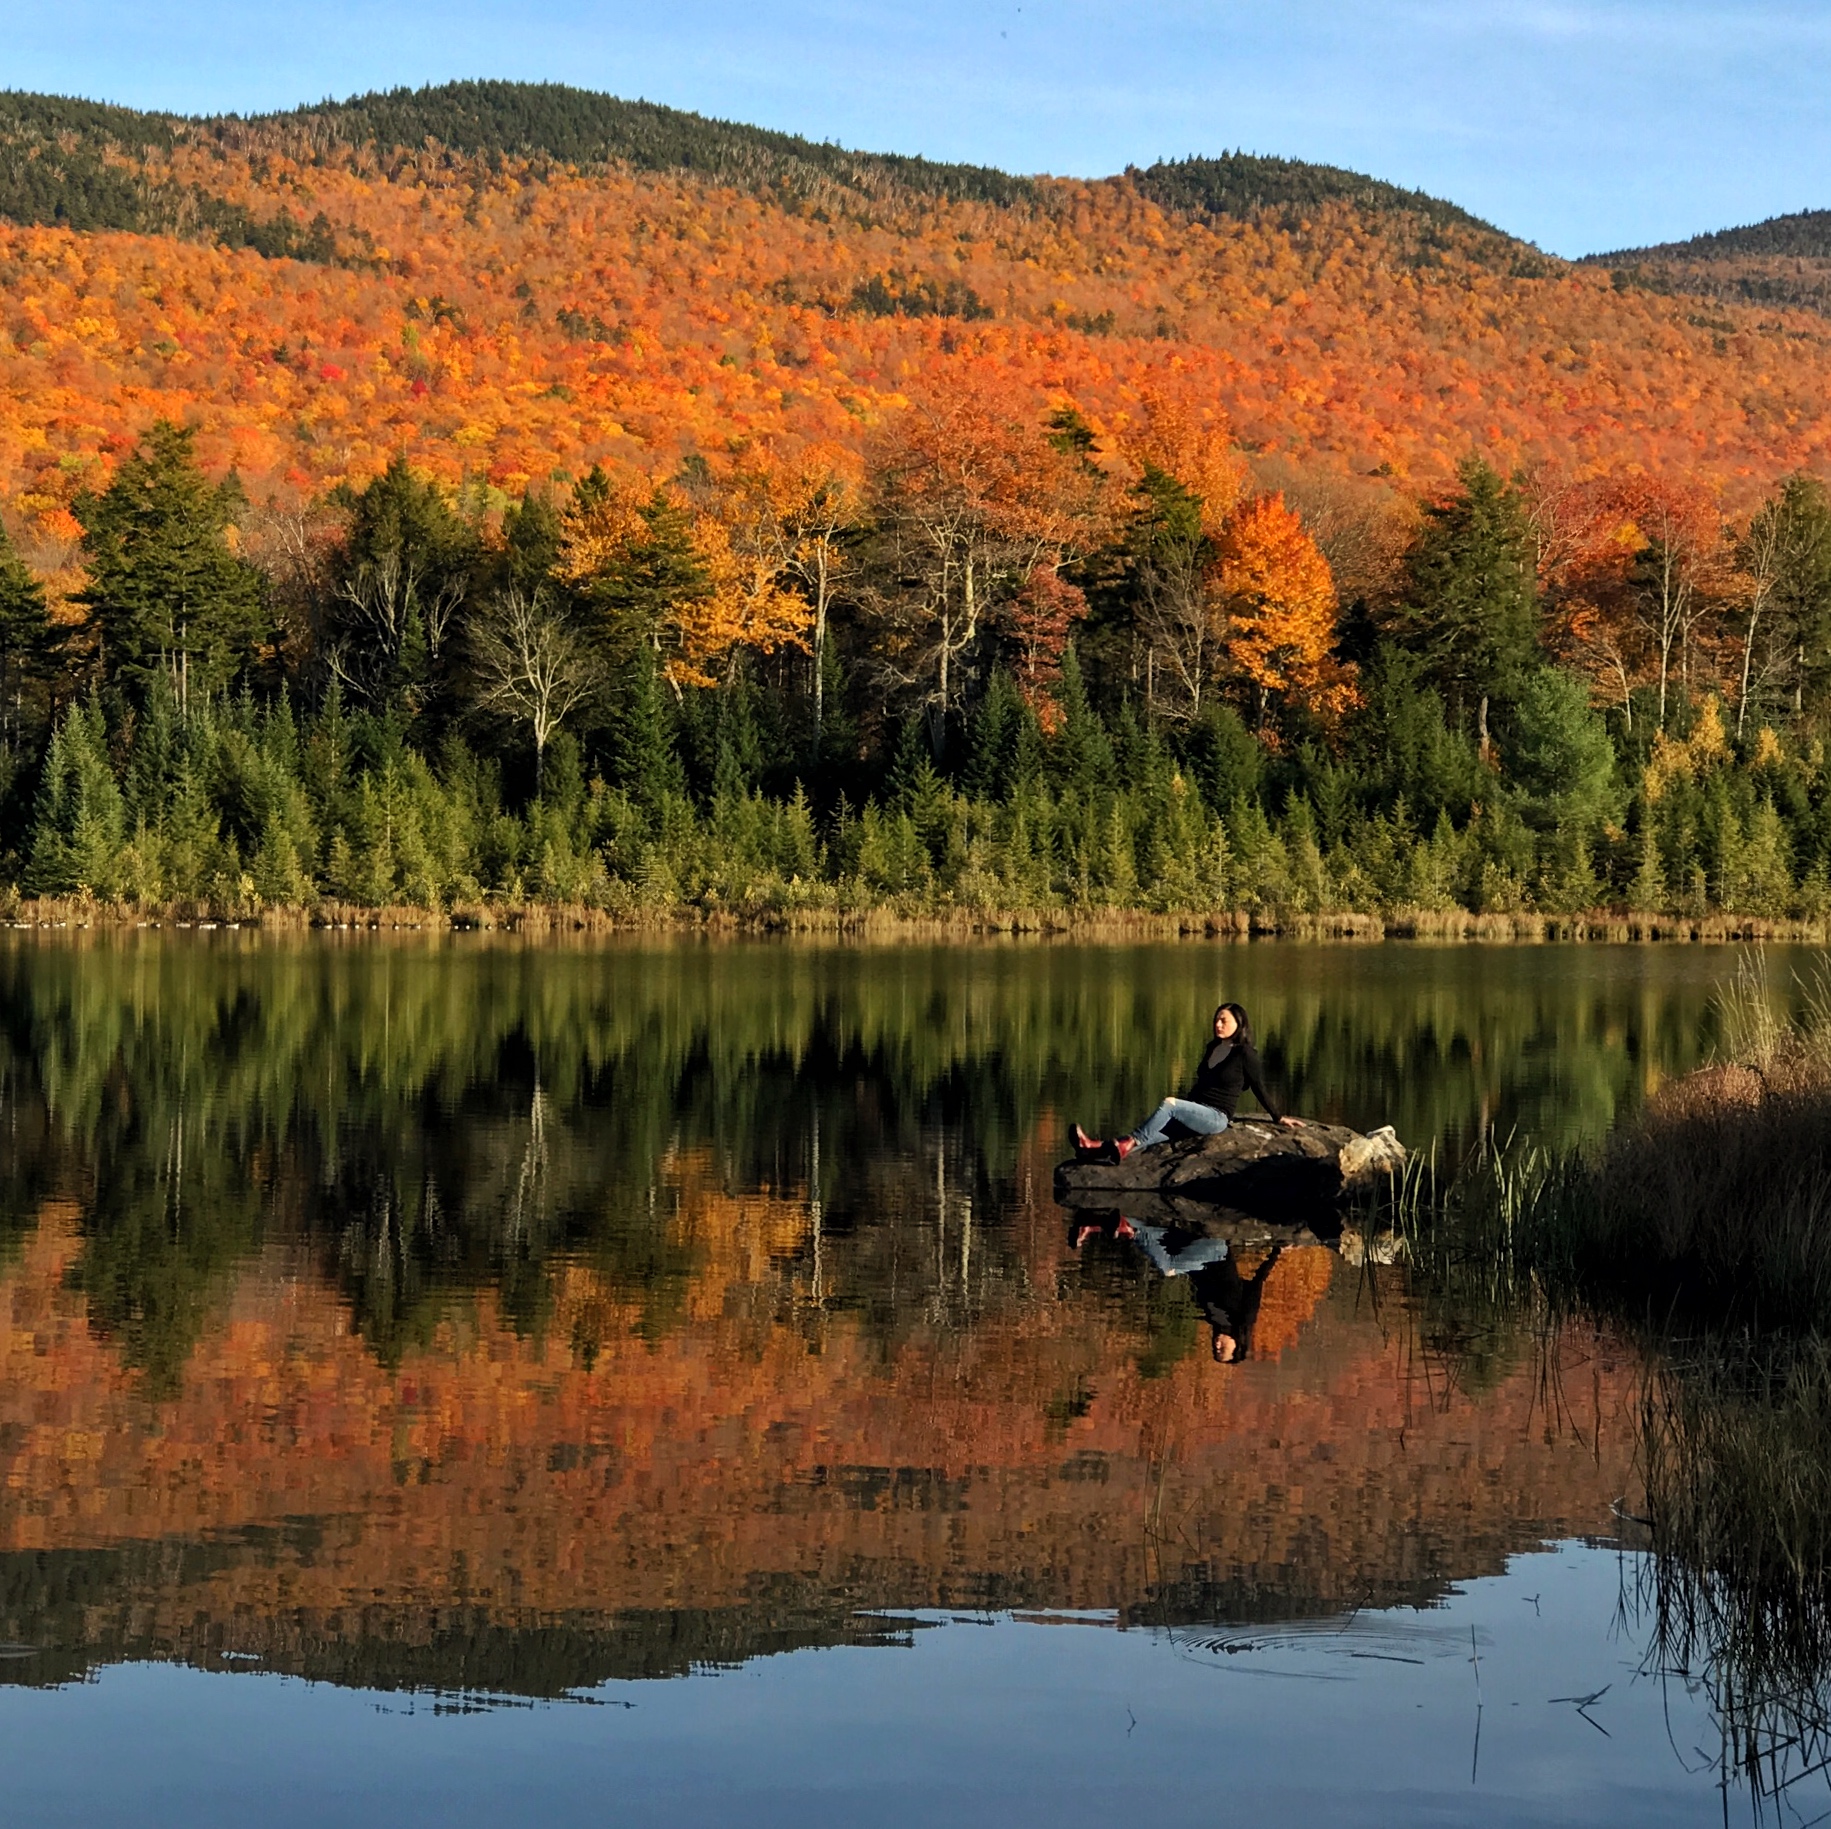 Blueberry Lake, Things to Do in Autumn Vermont - Road Trip Photo Guide | Travel-Break.net